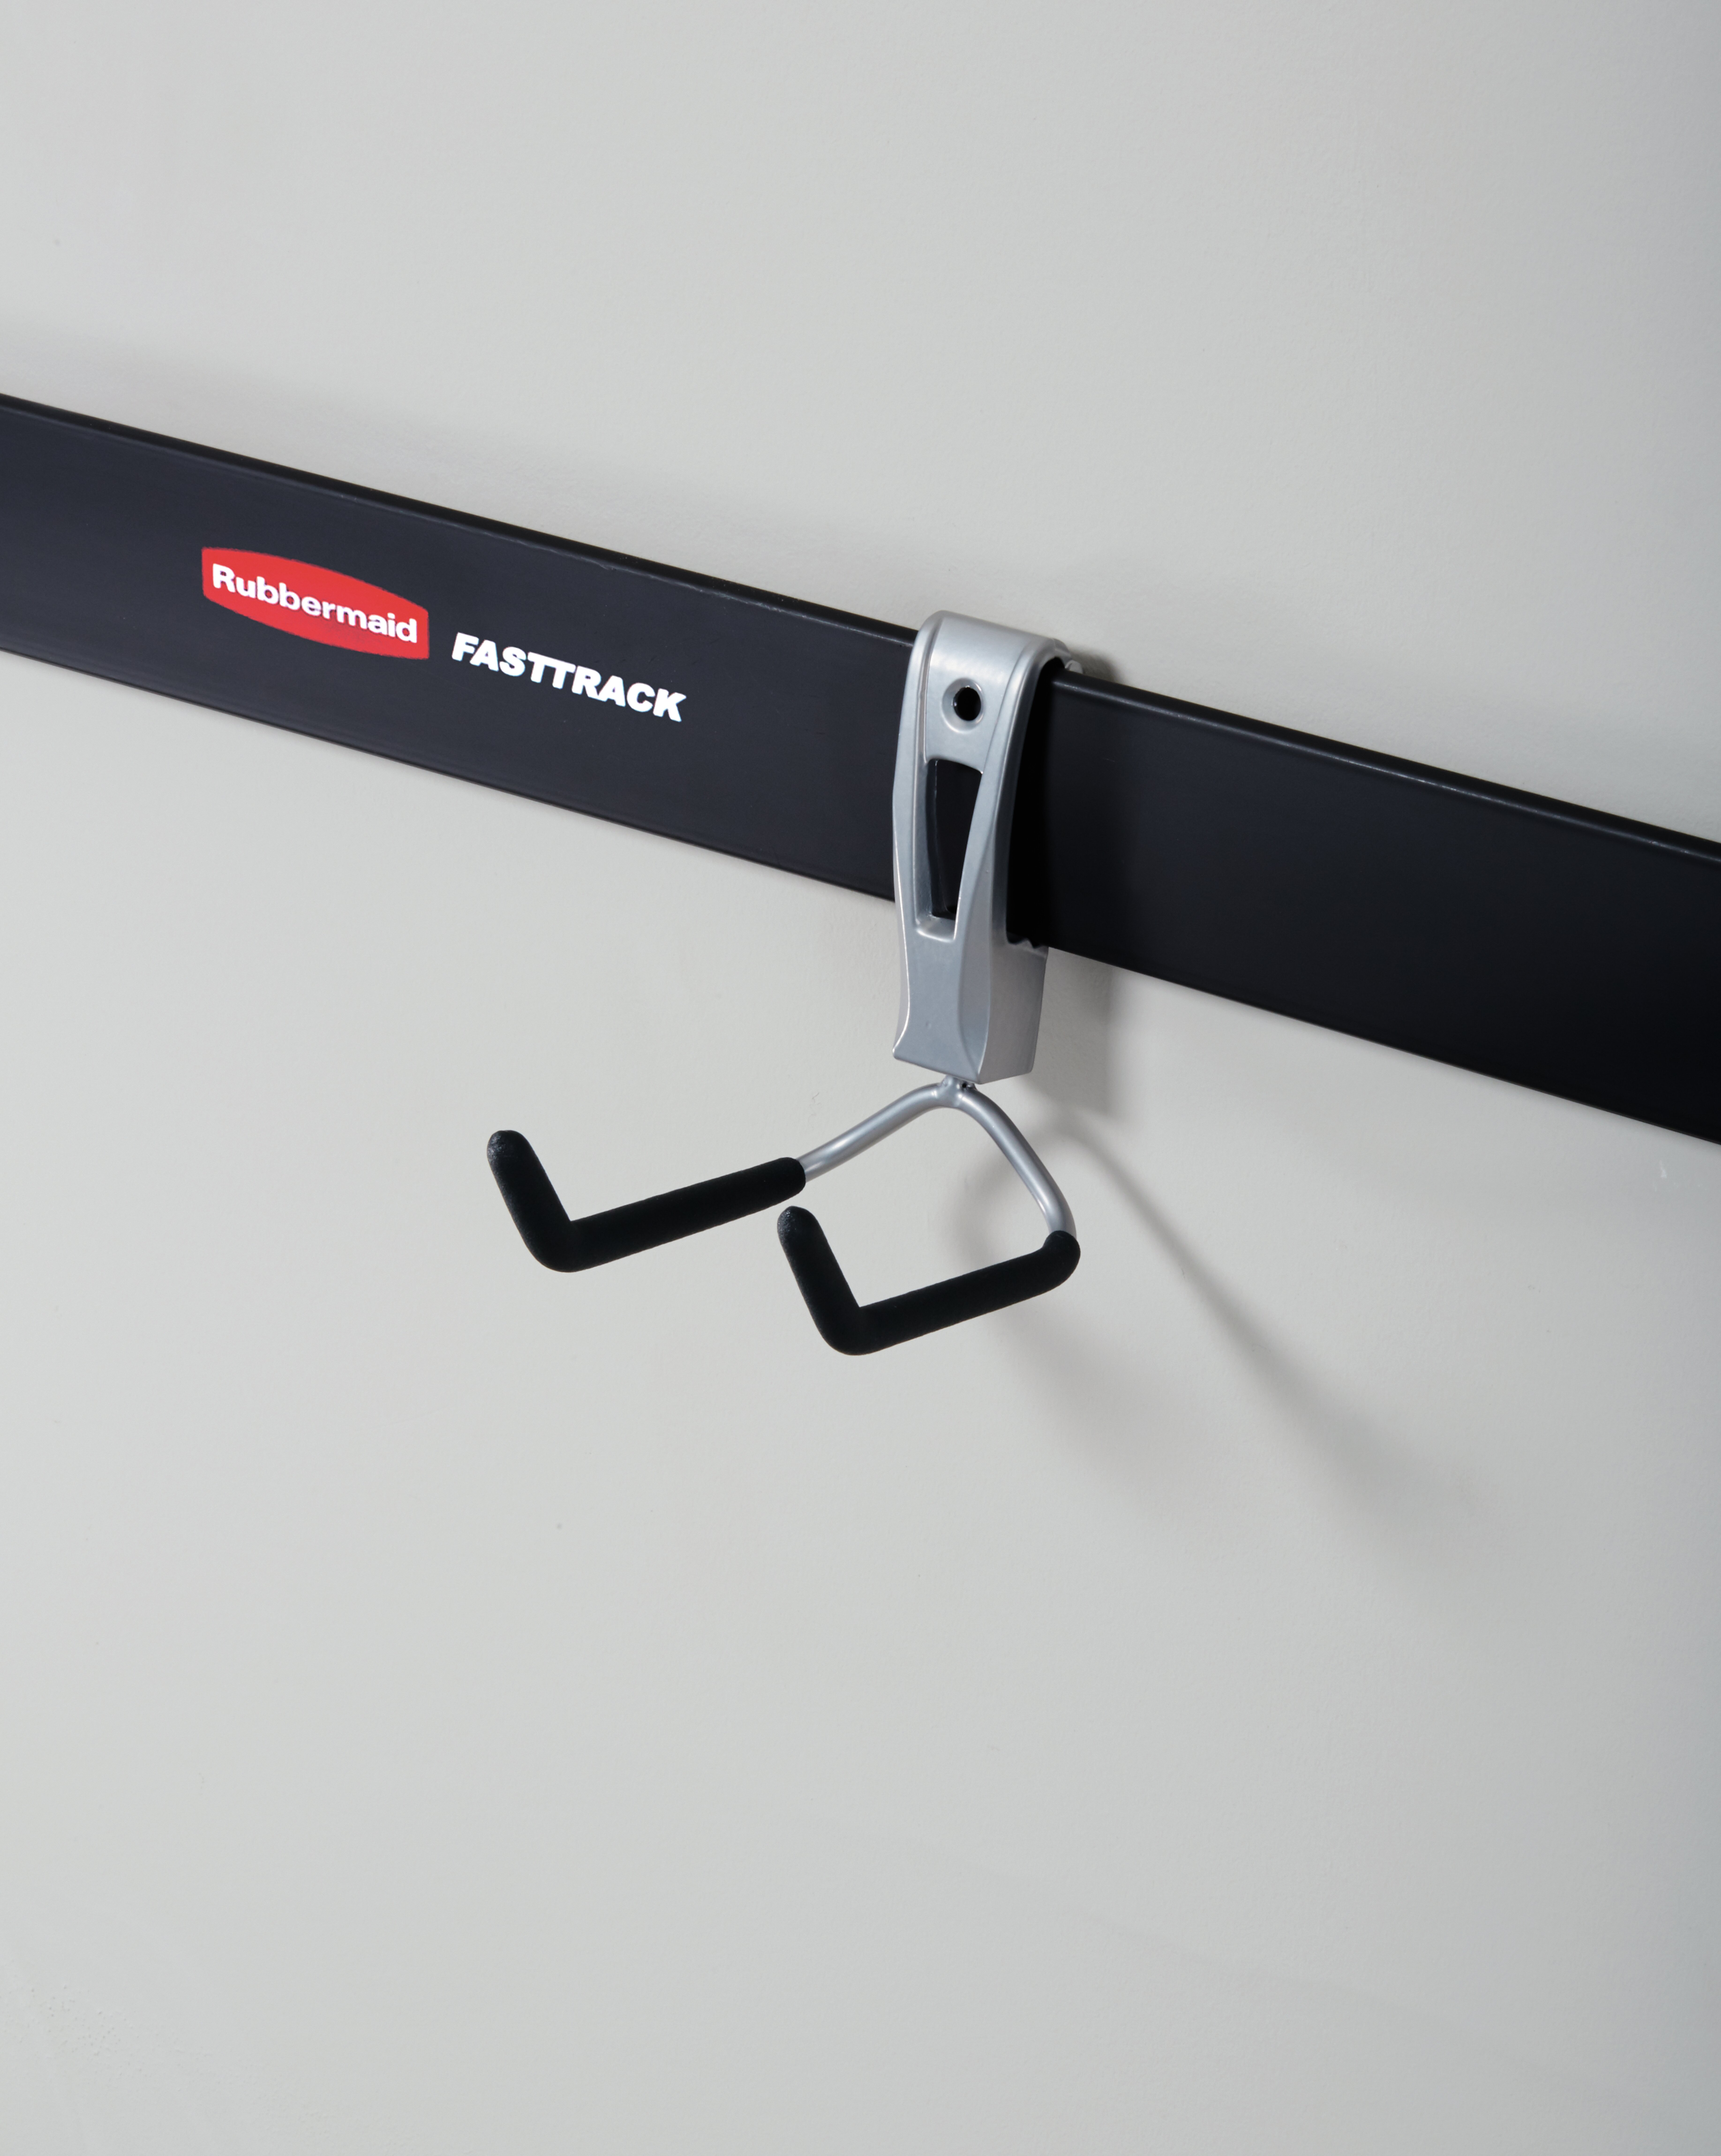 Details about   Rubbermaid Fasttrack Multi-Purpose Hook Individual 